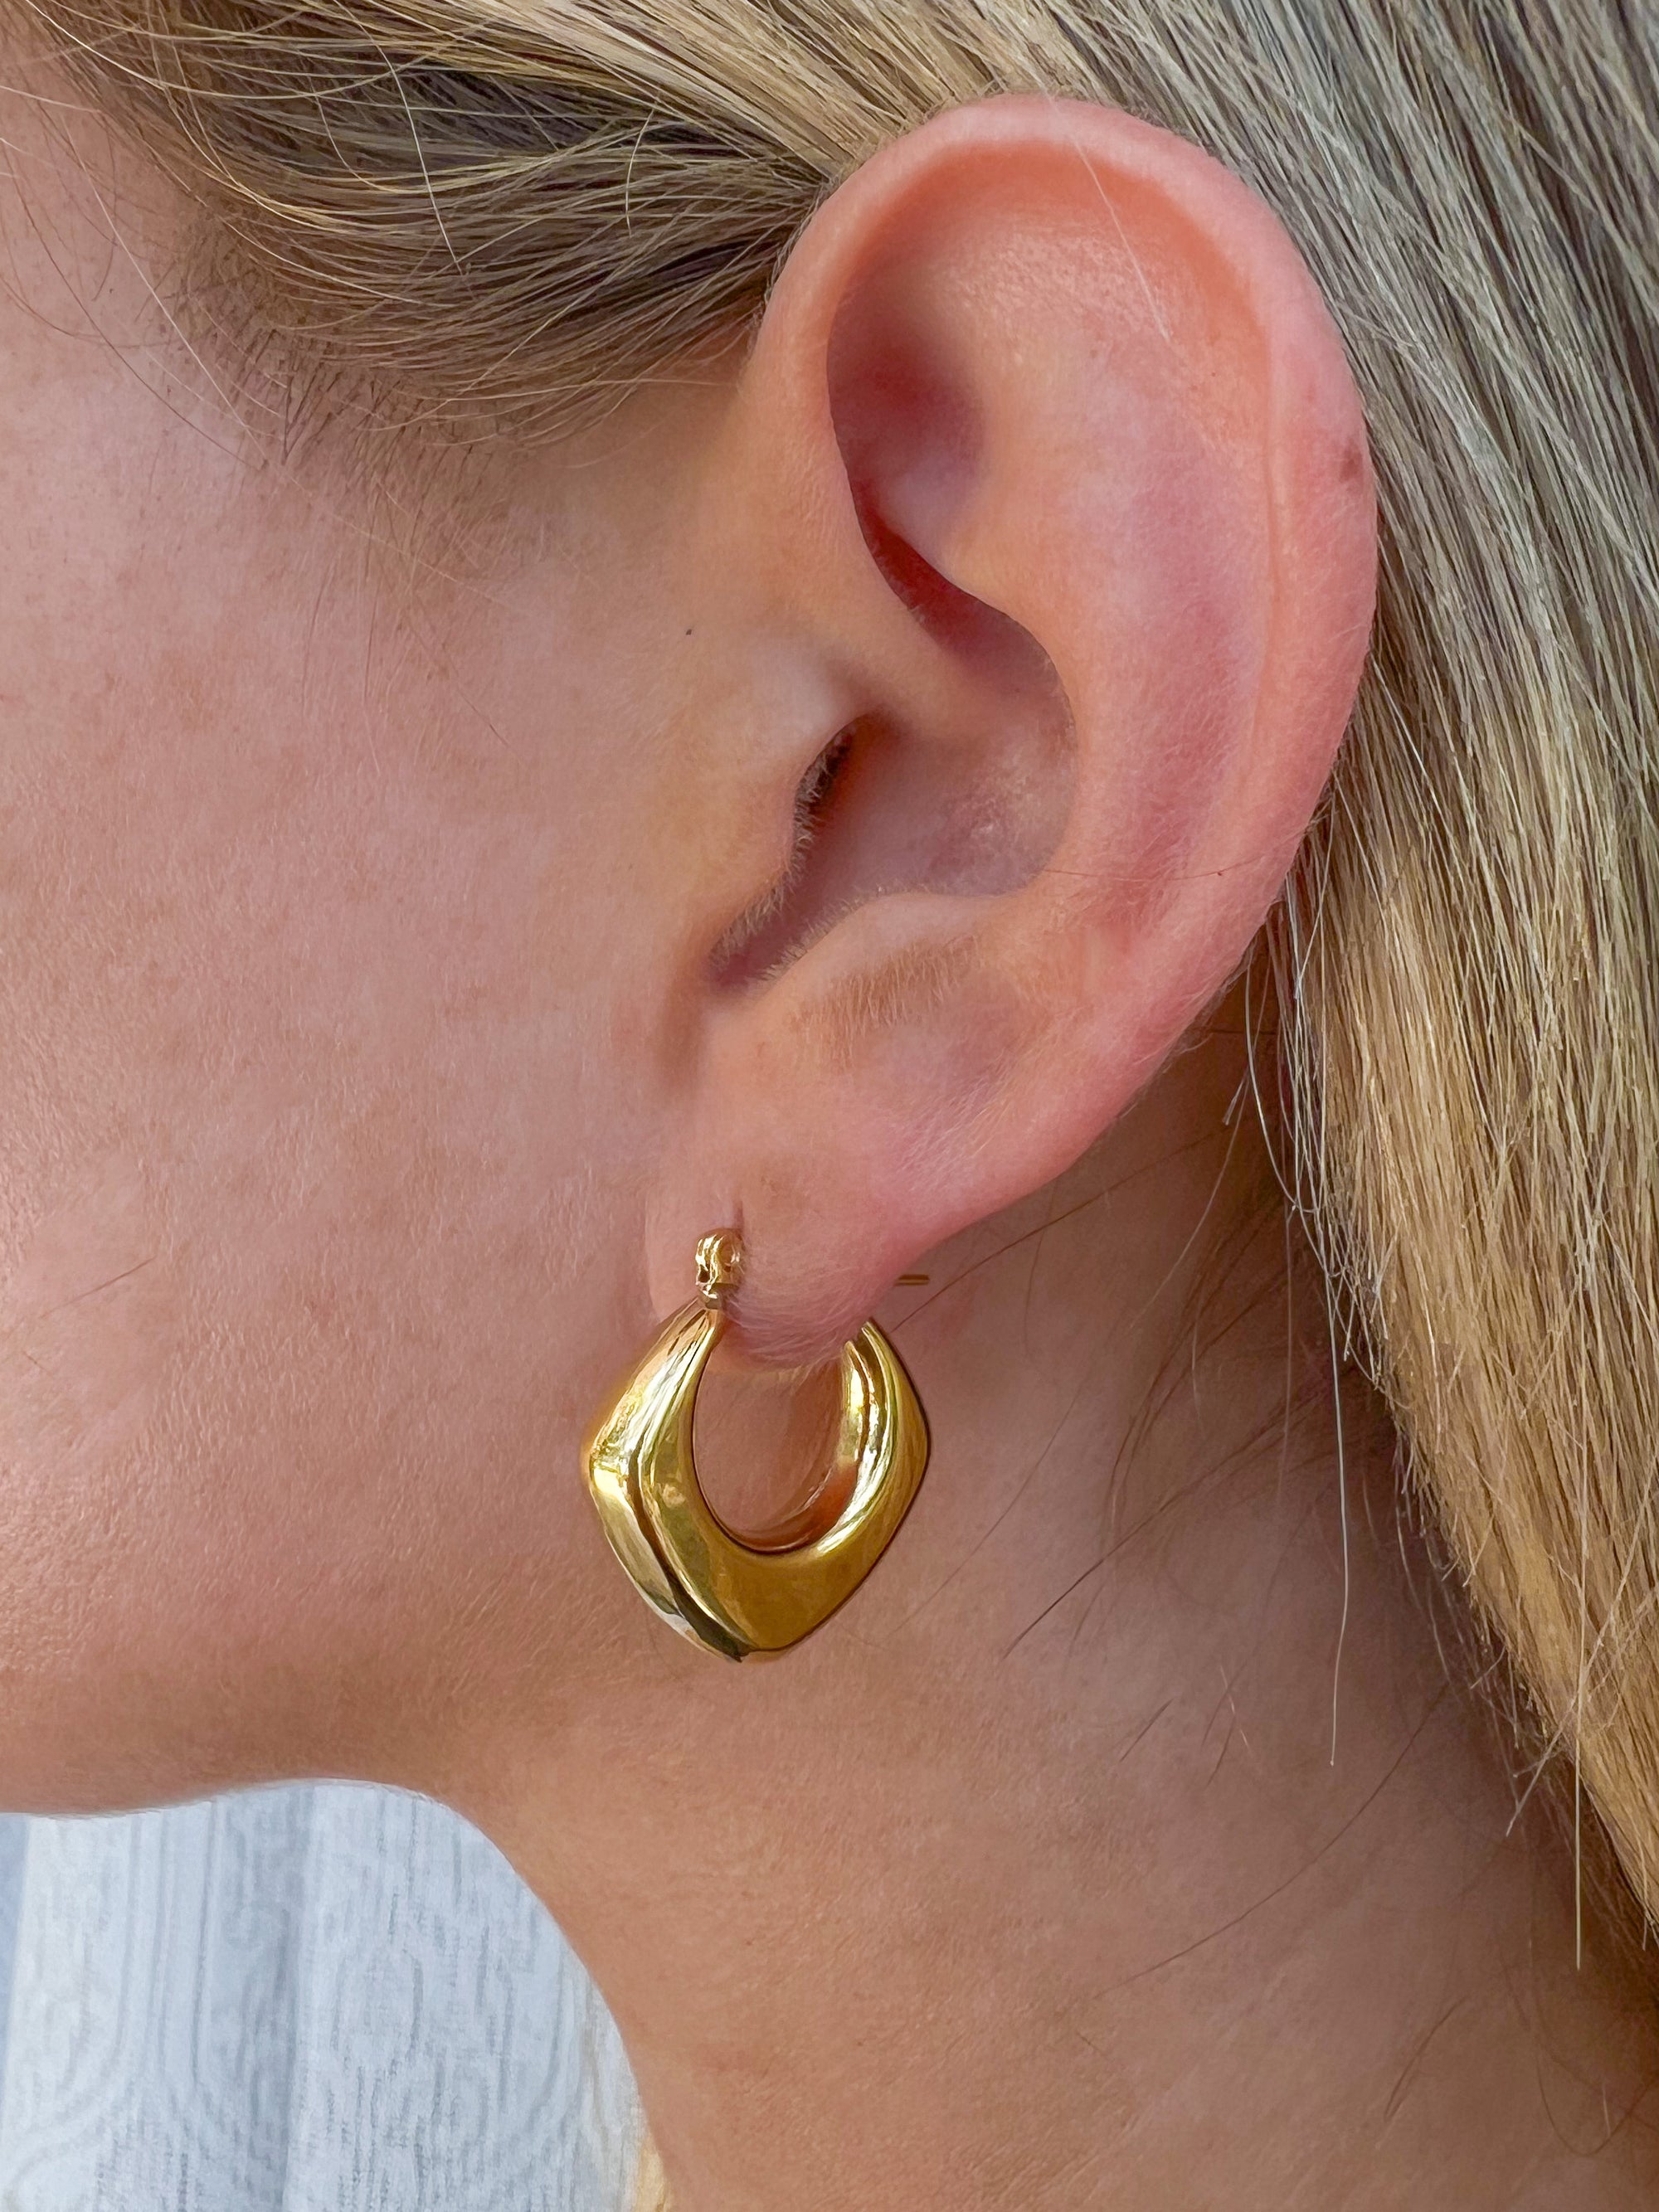 Effortless Hoops - For the Girls Jewelry